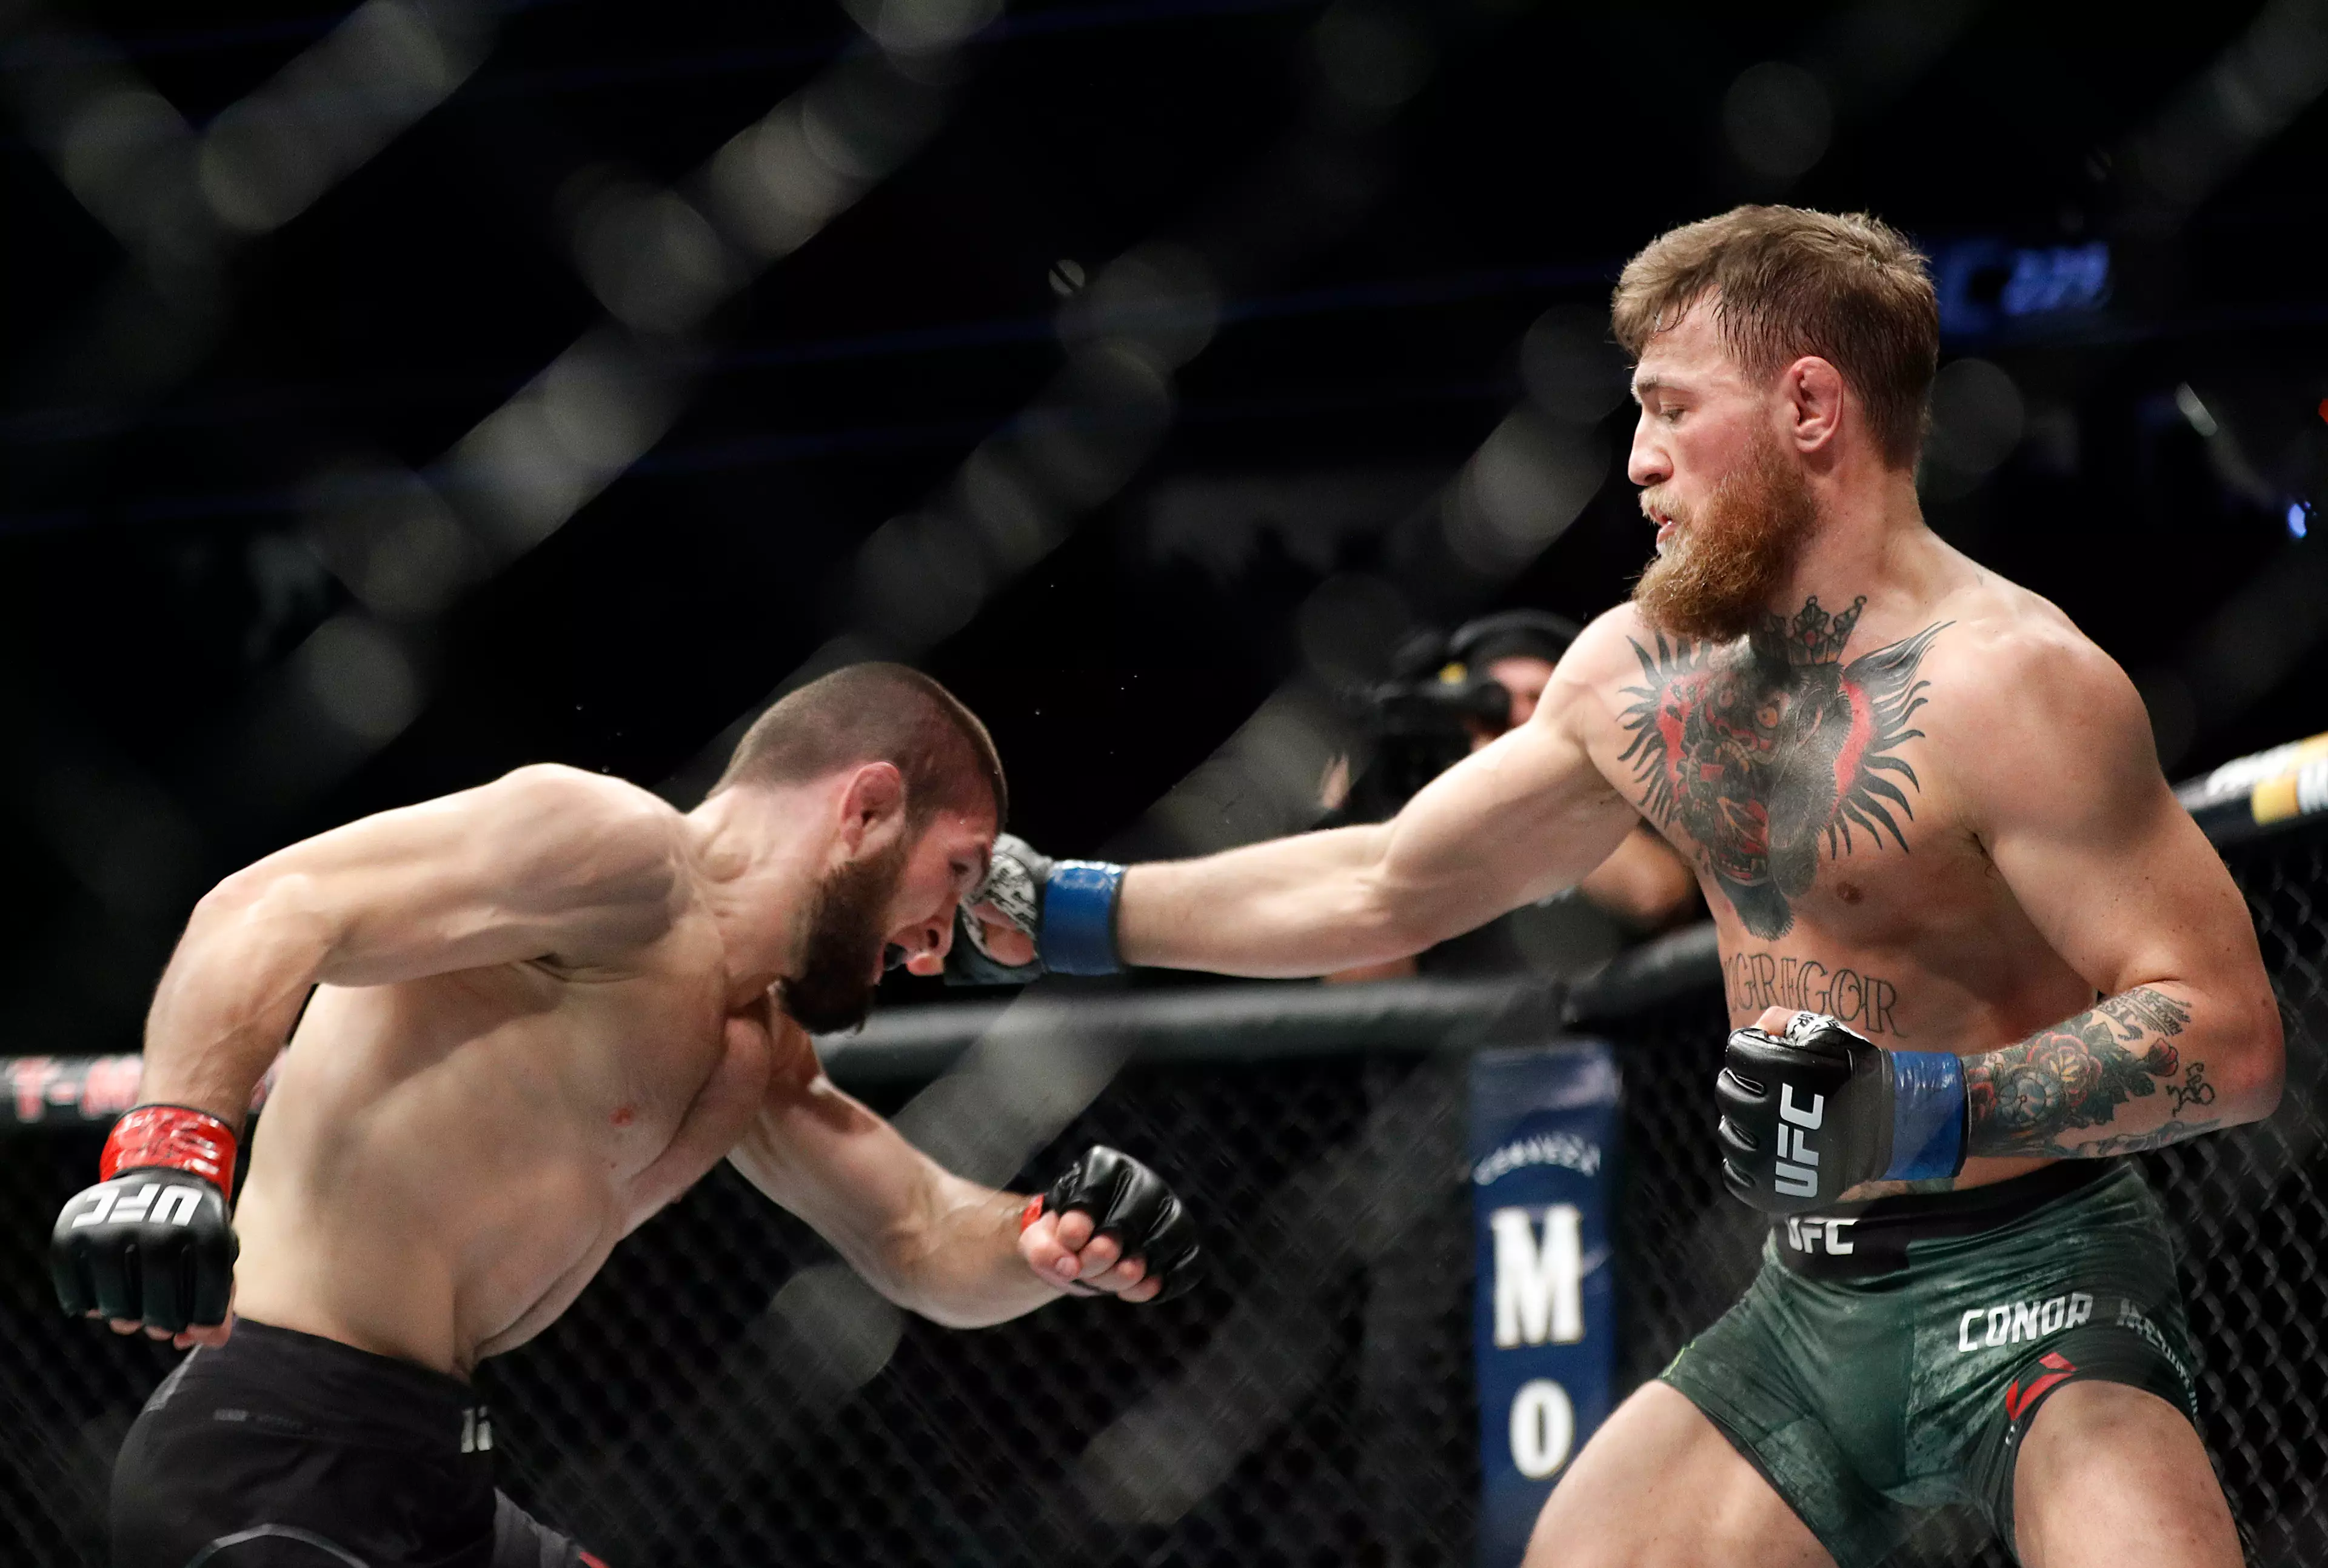 New Footage From UFC 229 Shows Conor McGregor Throwing Punch At Team Khabib